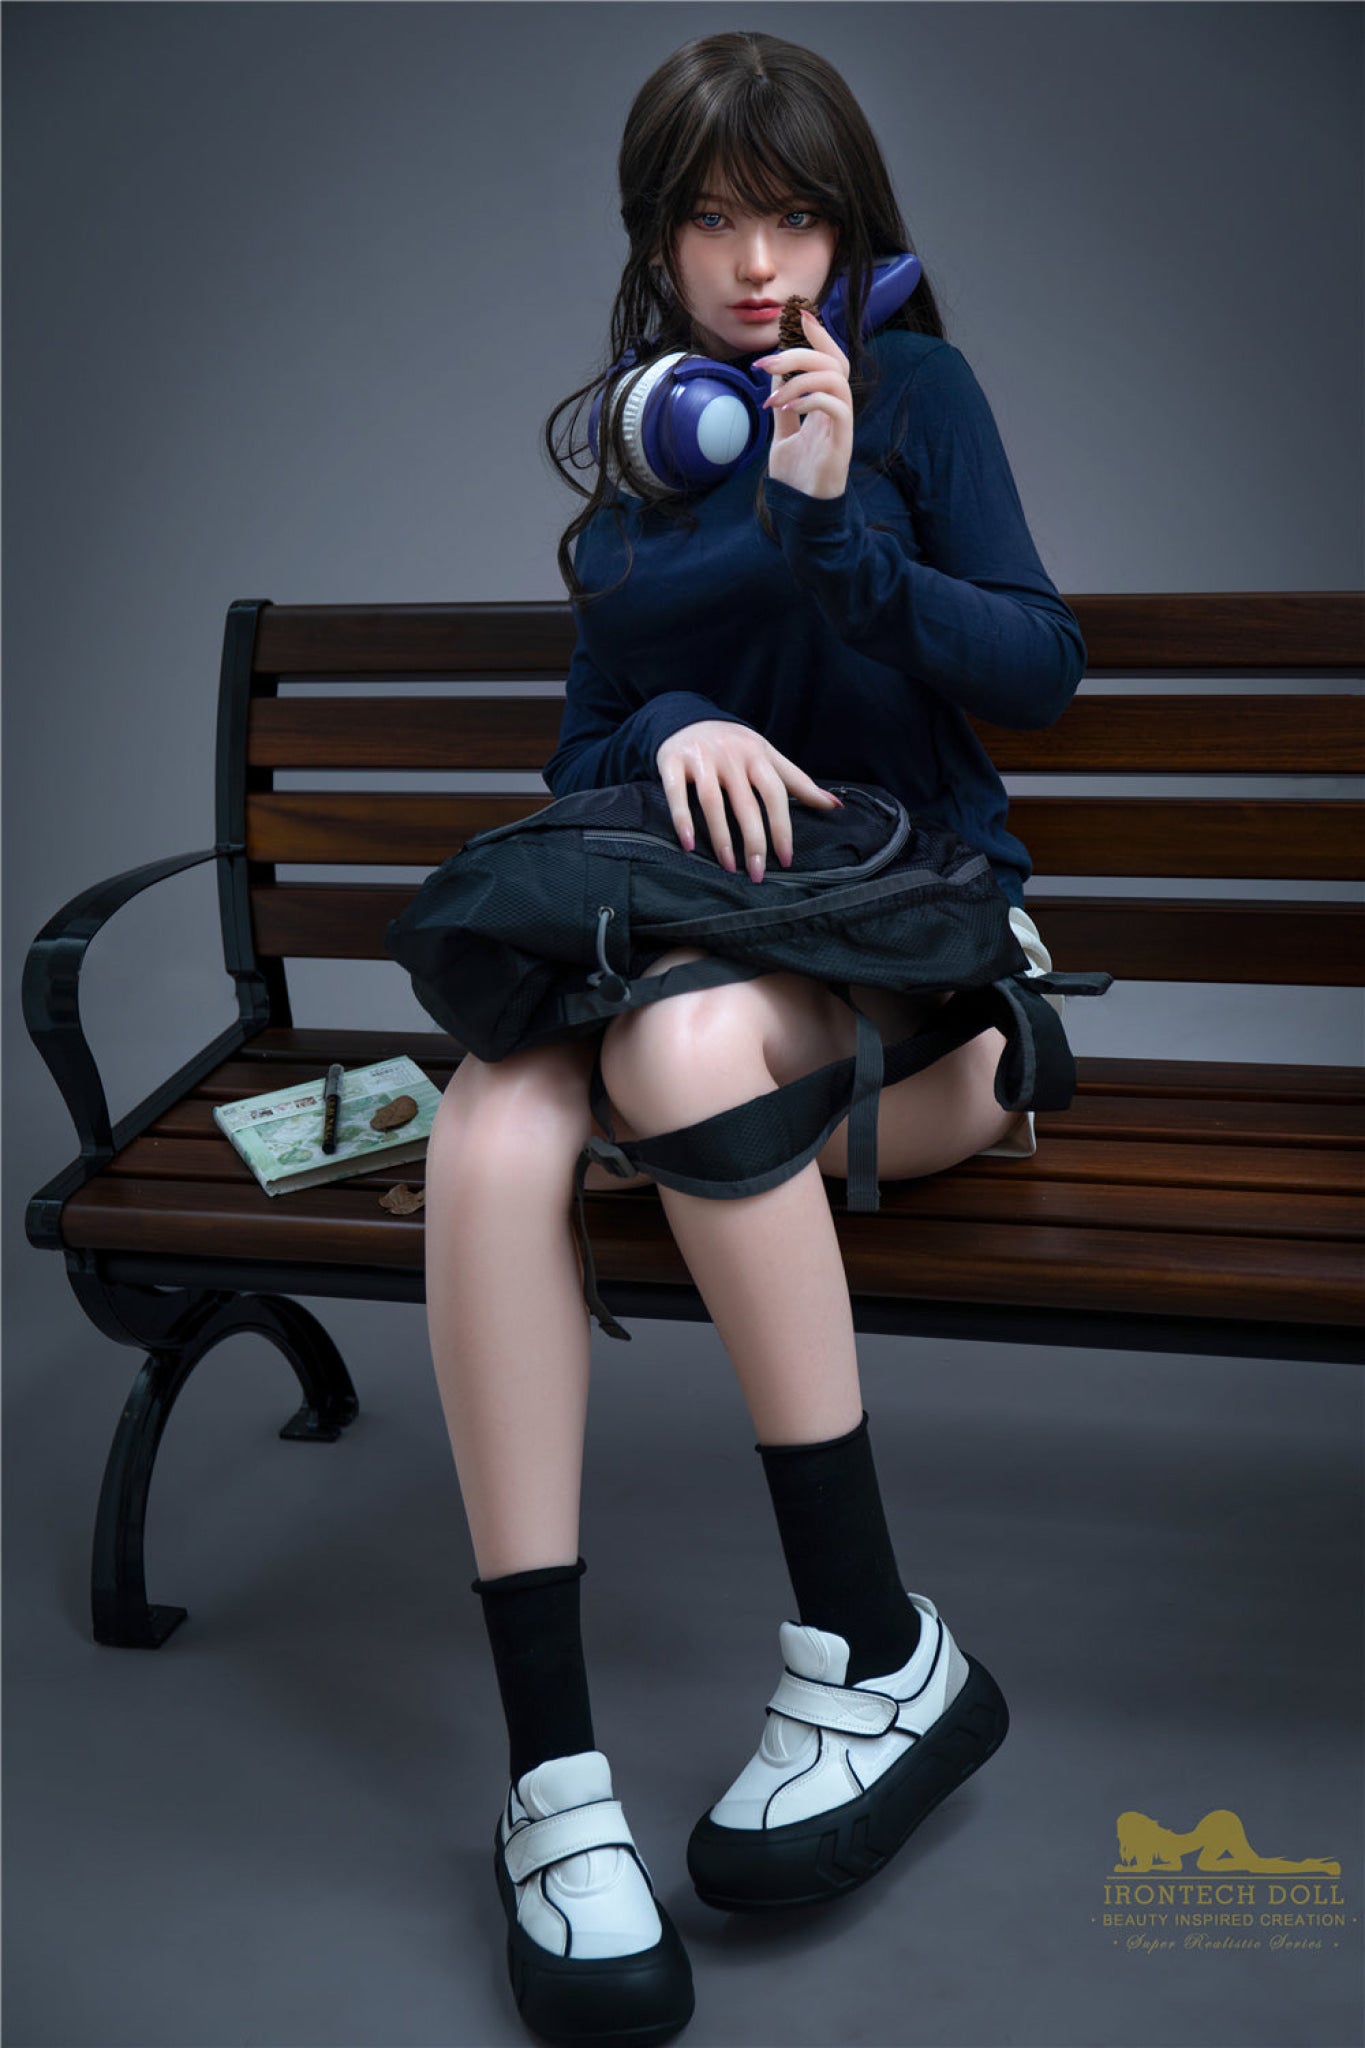 Misa Realistic Silicone Doll - IronTech Doll® Irontech Doll®